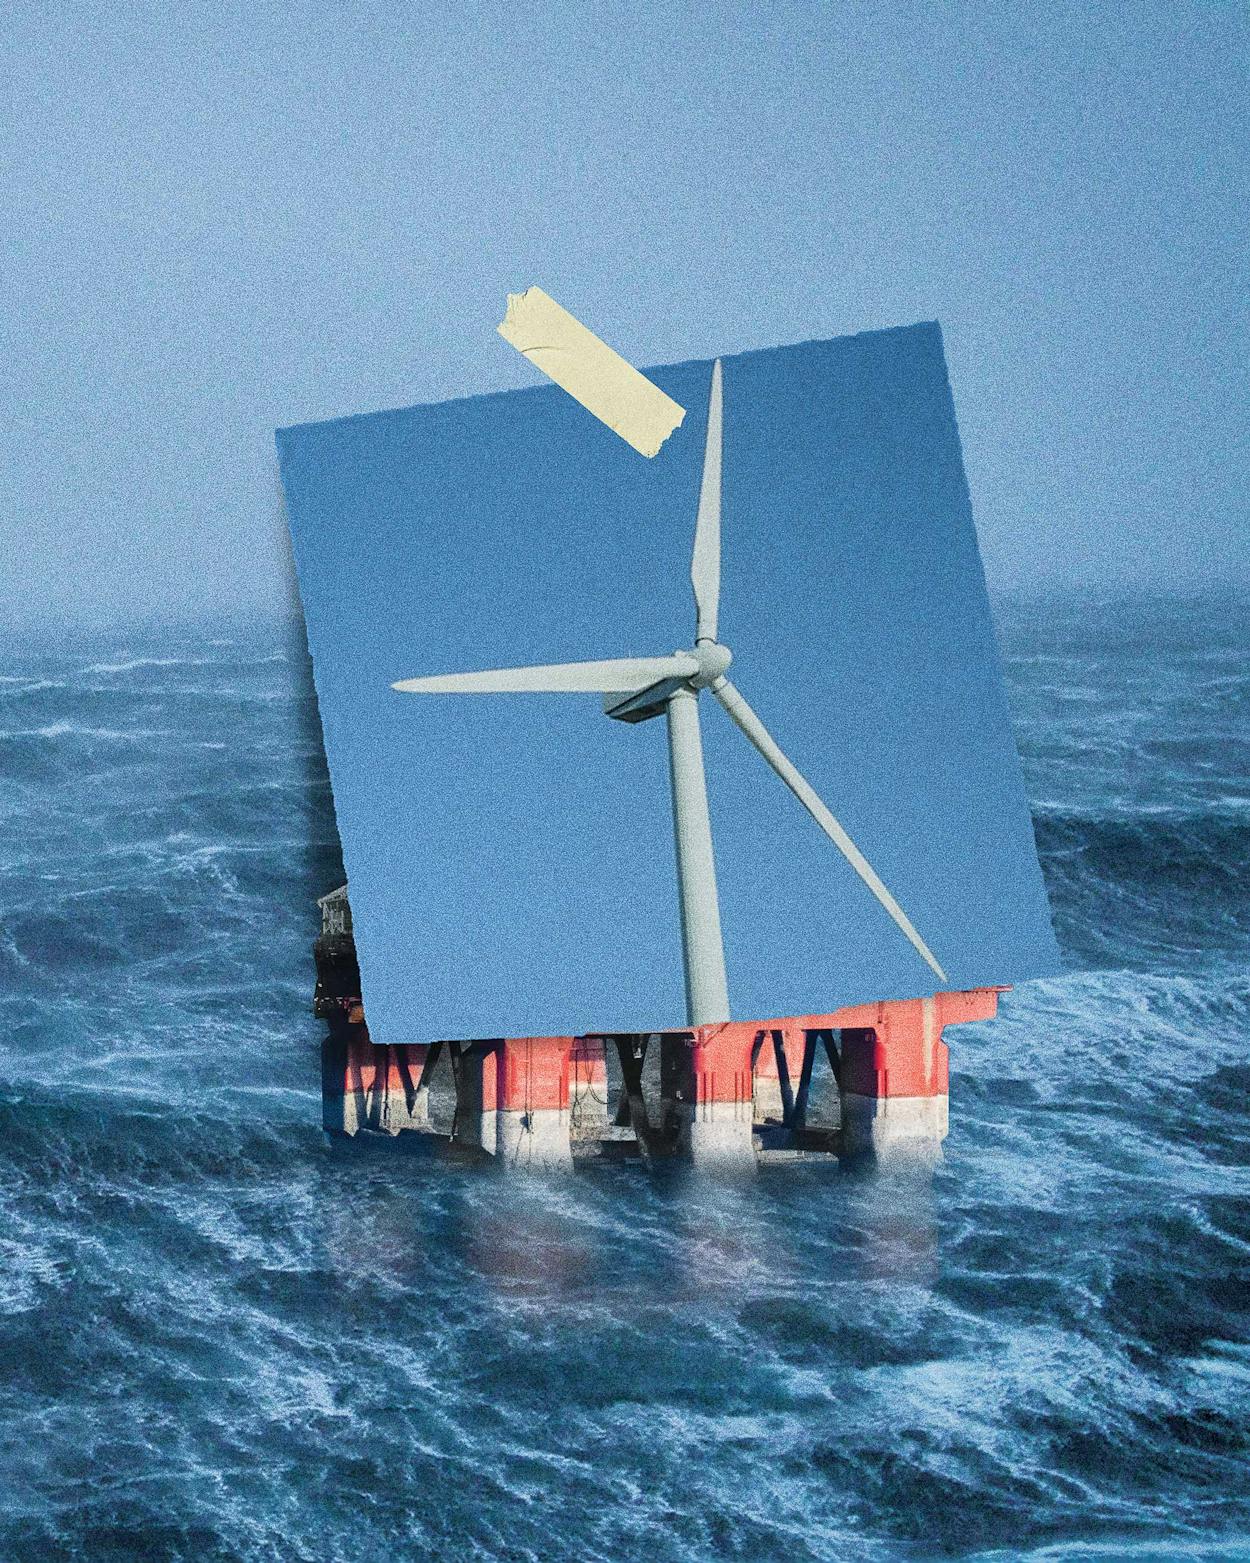 https://img.texasmonthly.com/2021/03/Brownsville-Energy-sea-wind-turbine-farm-offshore-hero.jpg?auto=compress&crop=faces&fit=fit&fm=jpg&h=0&ixlib=php-3.3.1&q=45&w=1250